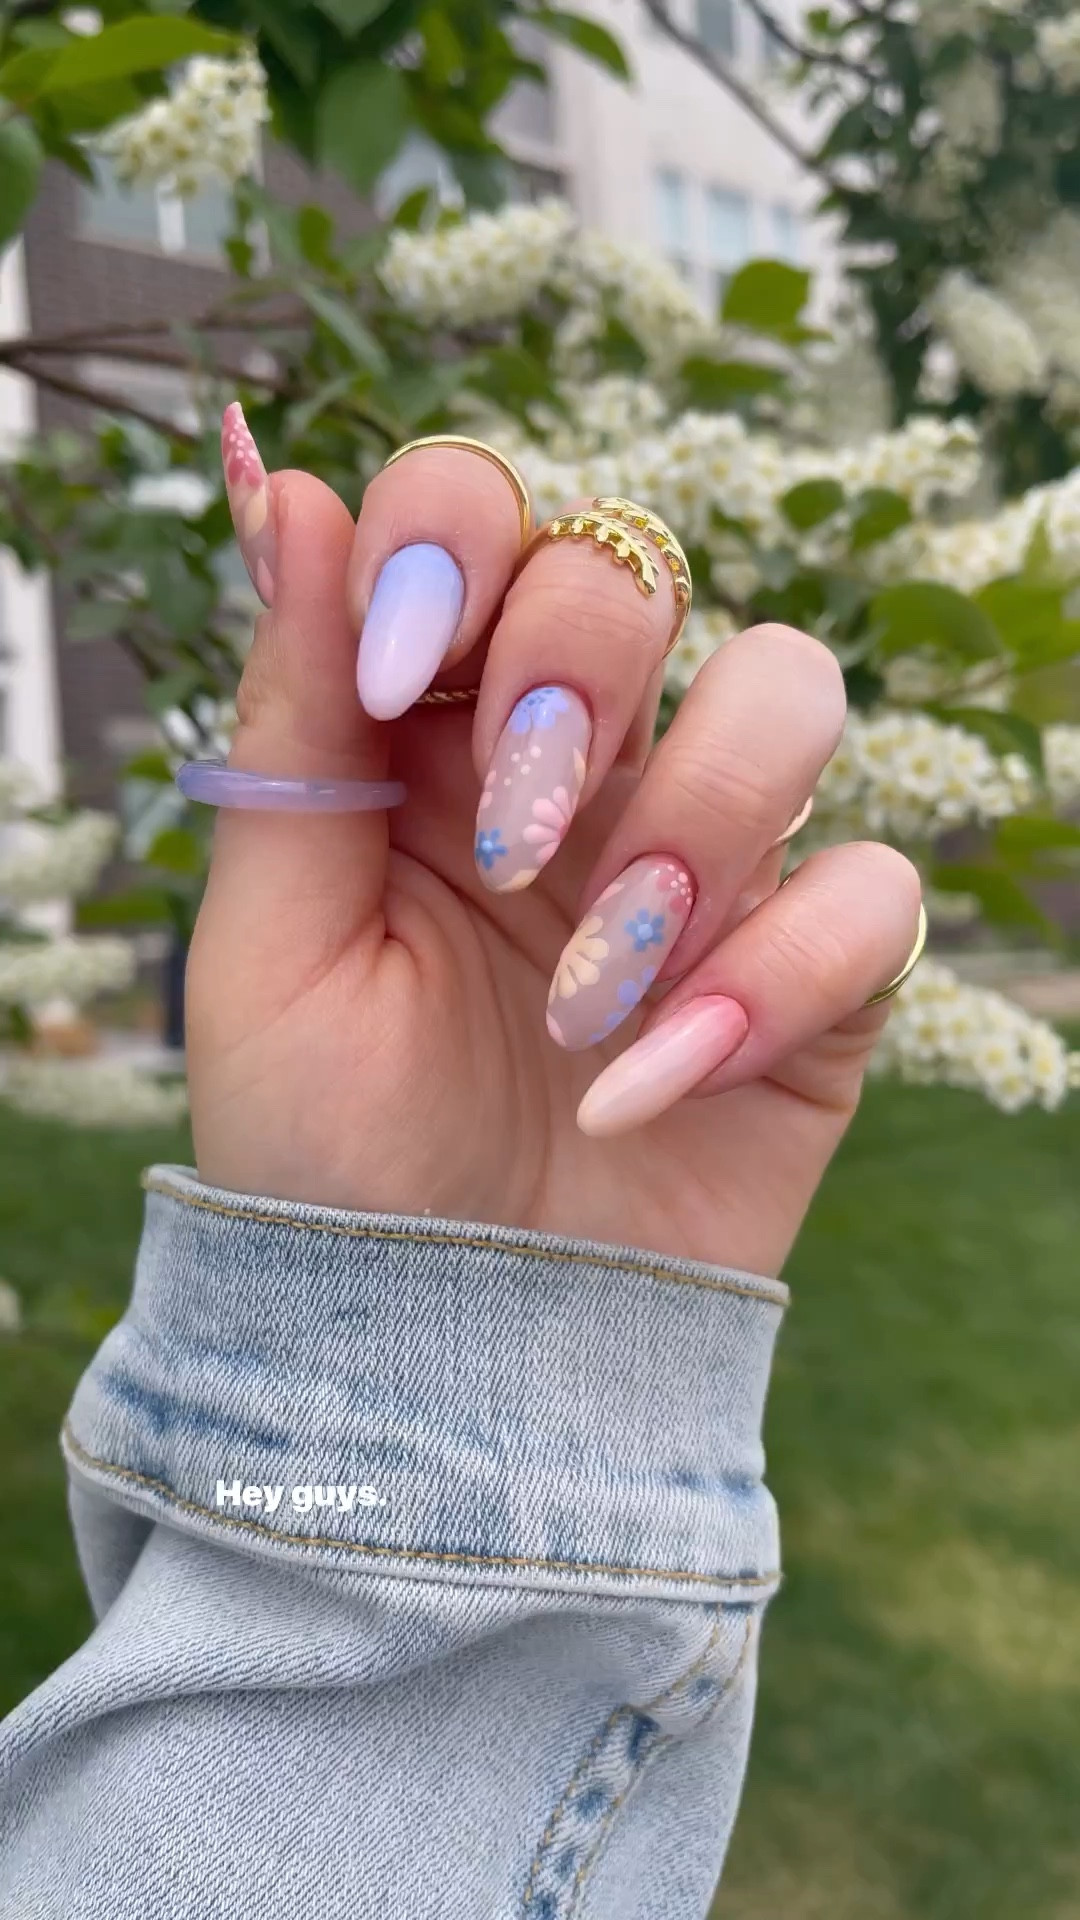 Polly Pocket Nails Are the Nostalgic Mani We'll Be Wearing All Spring